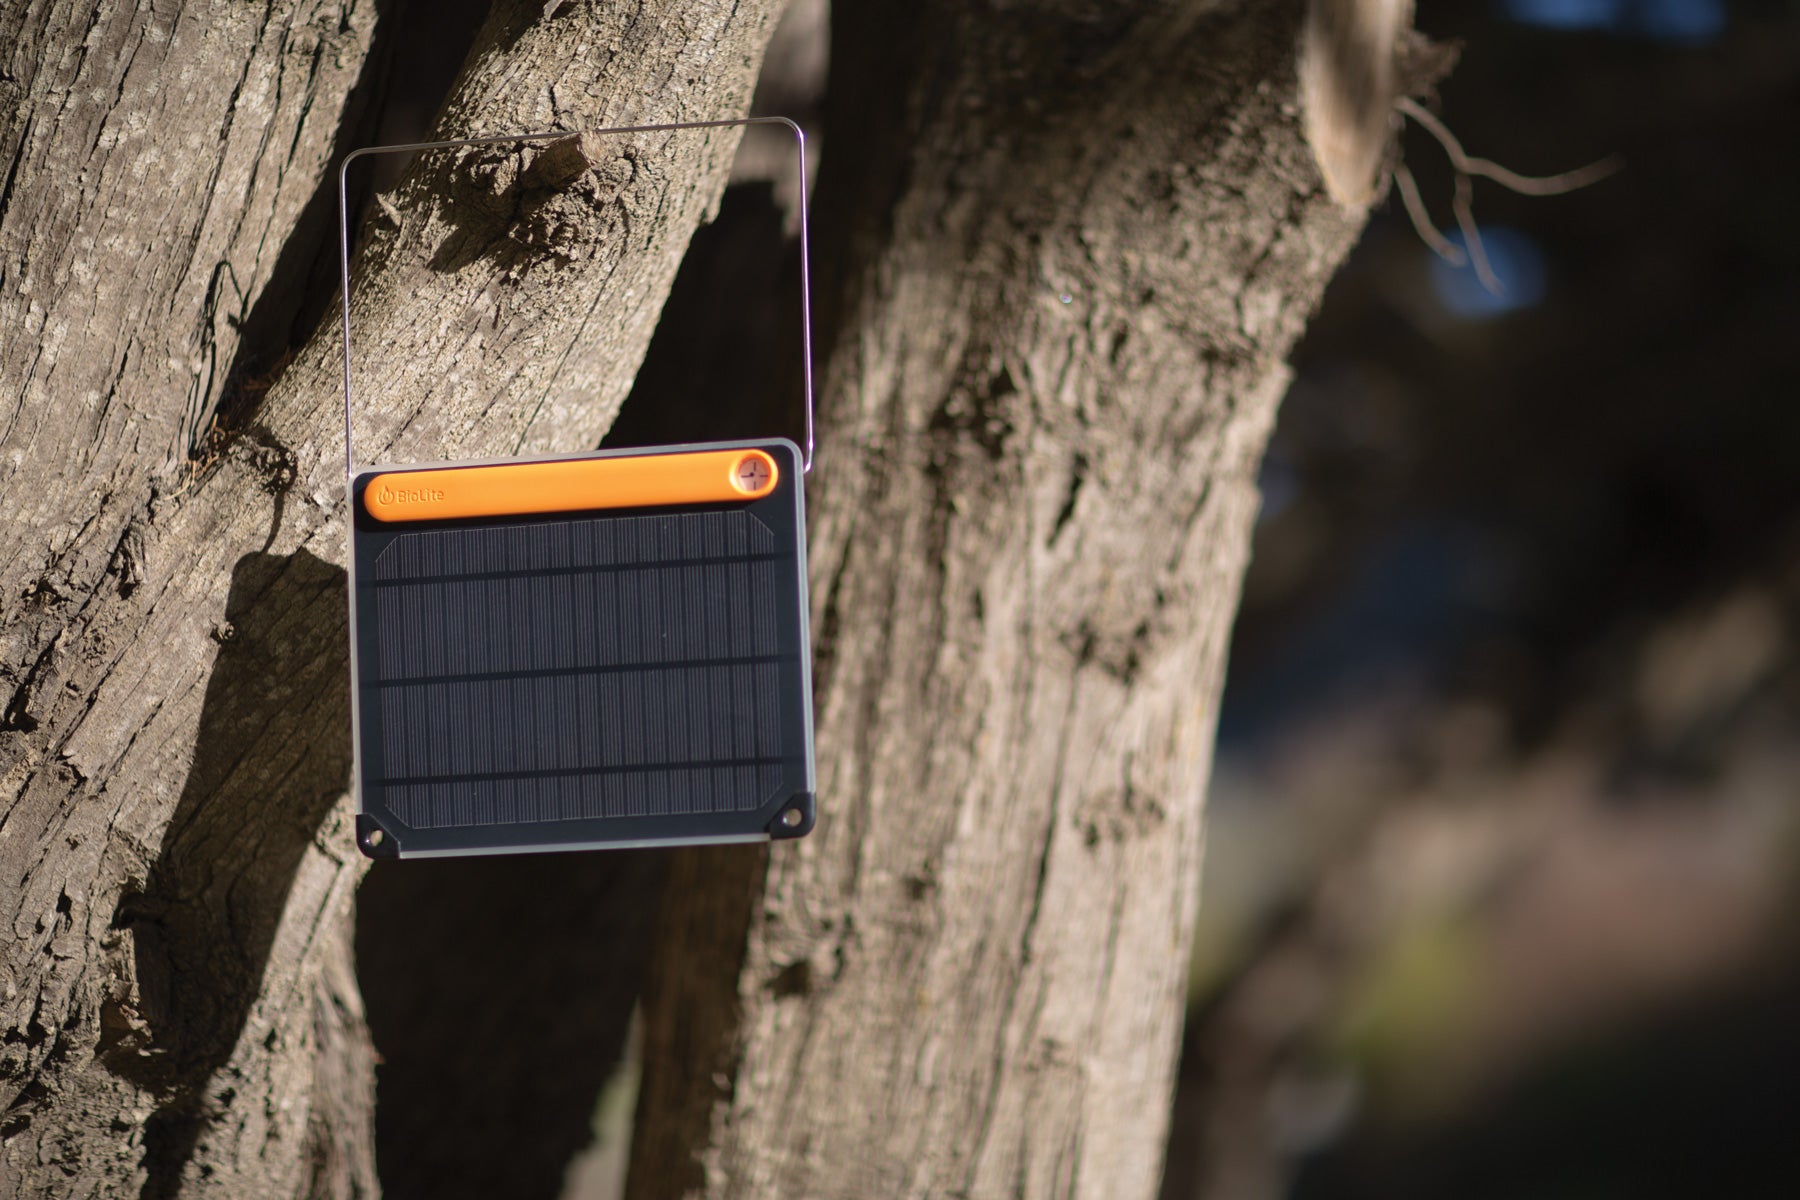 Biolite solar panel can be hung in any location